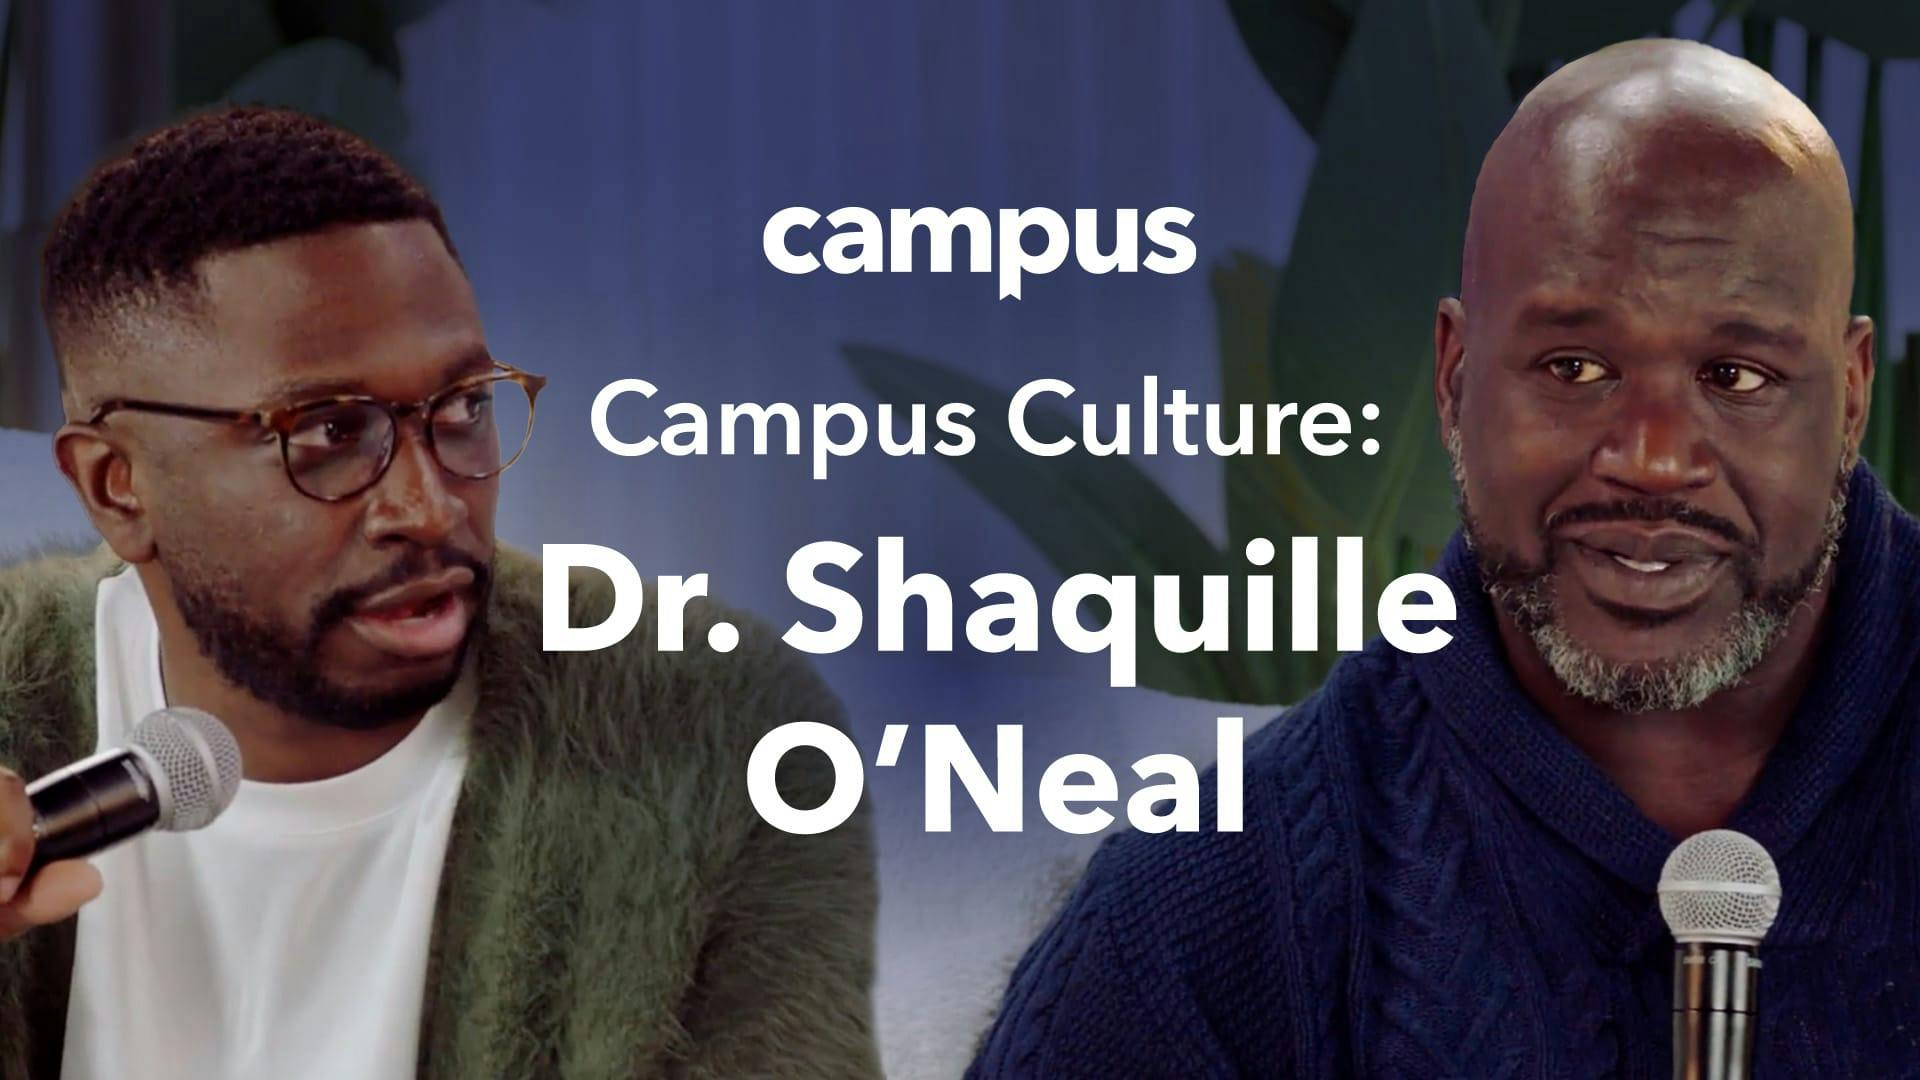 Dr. Shaquille O'Neal invests in Campus